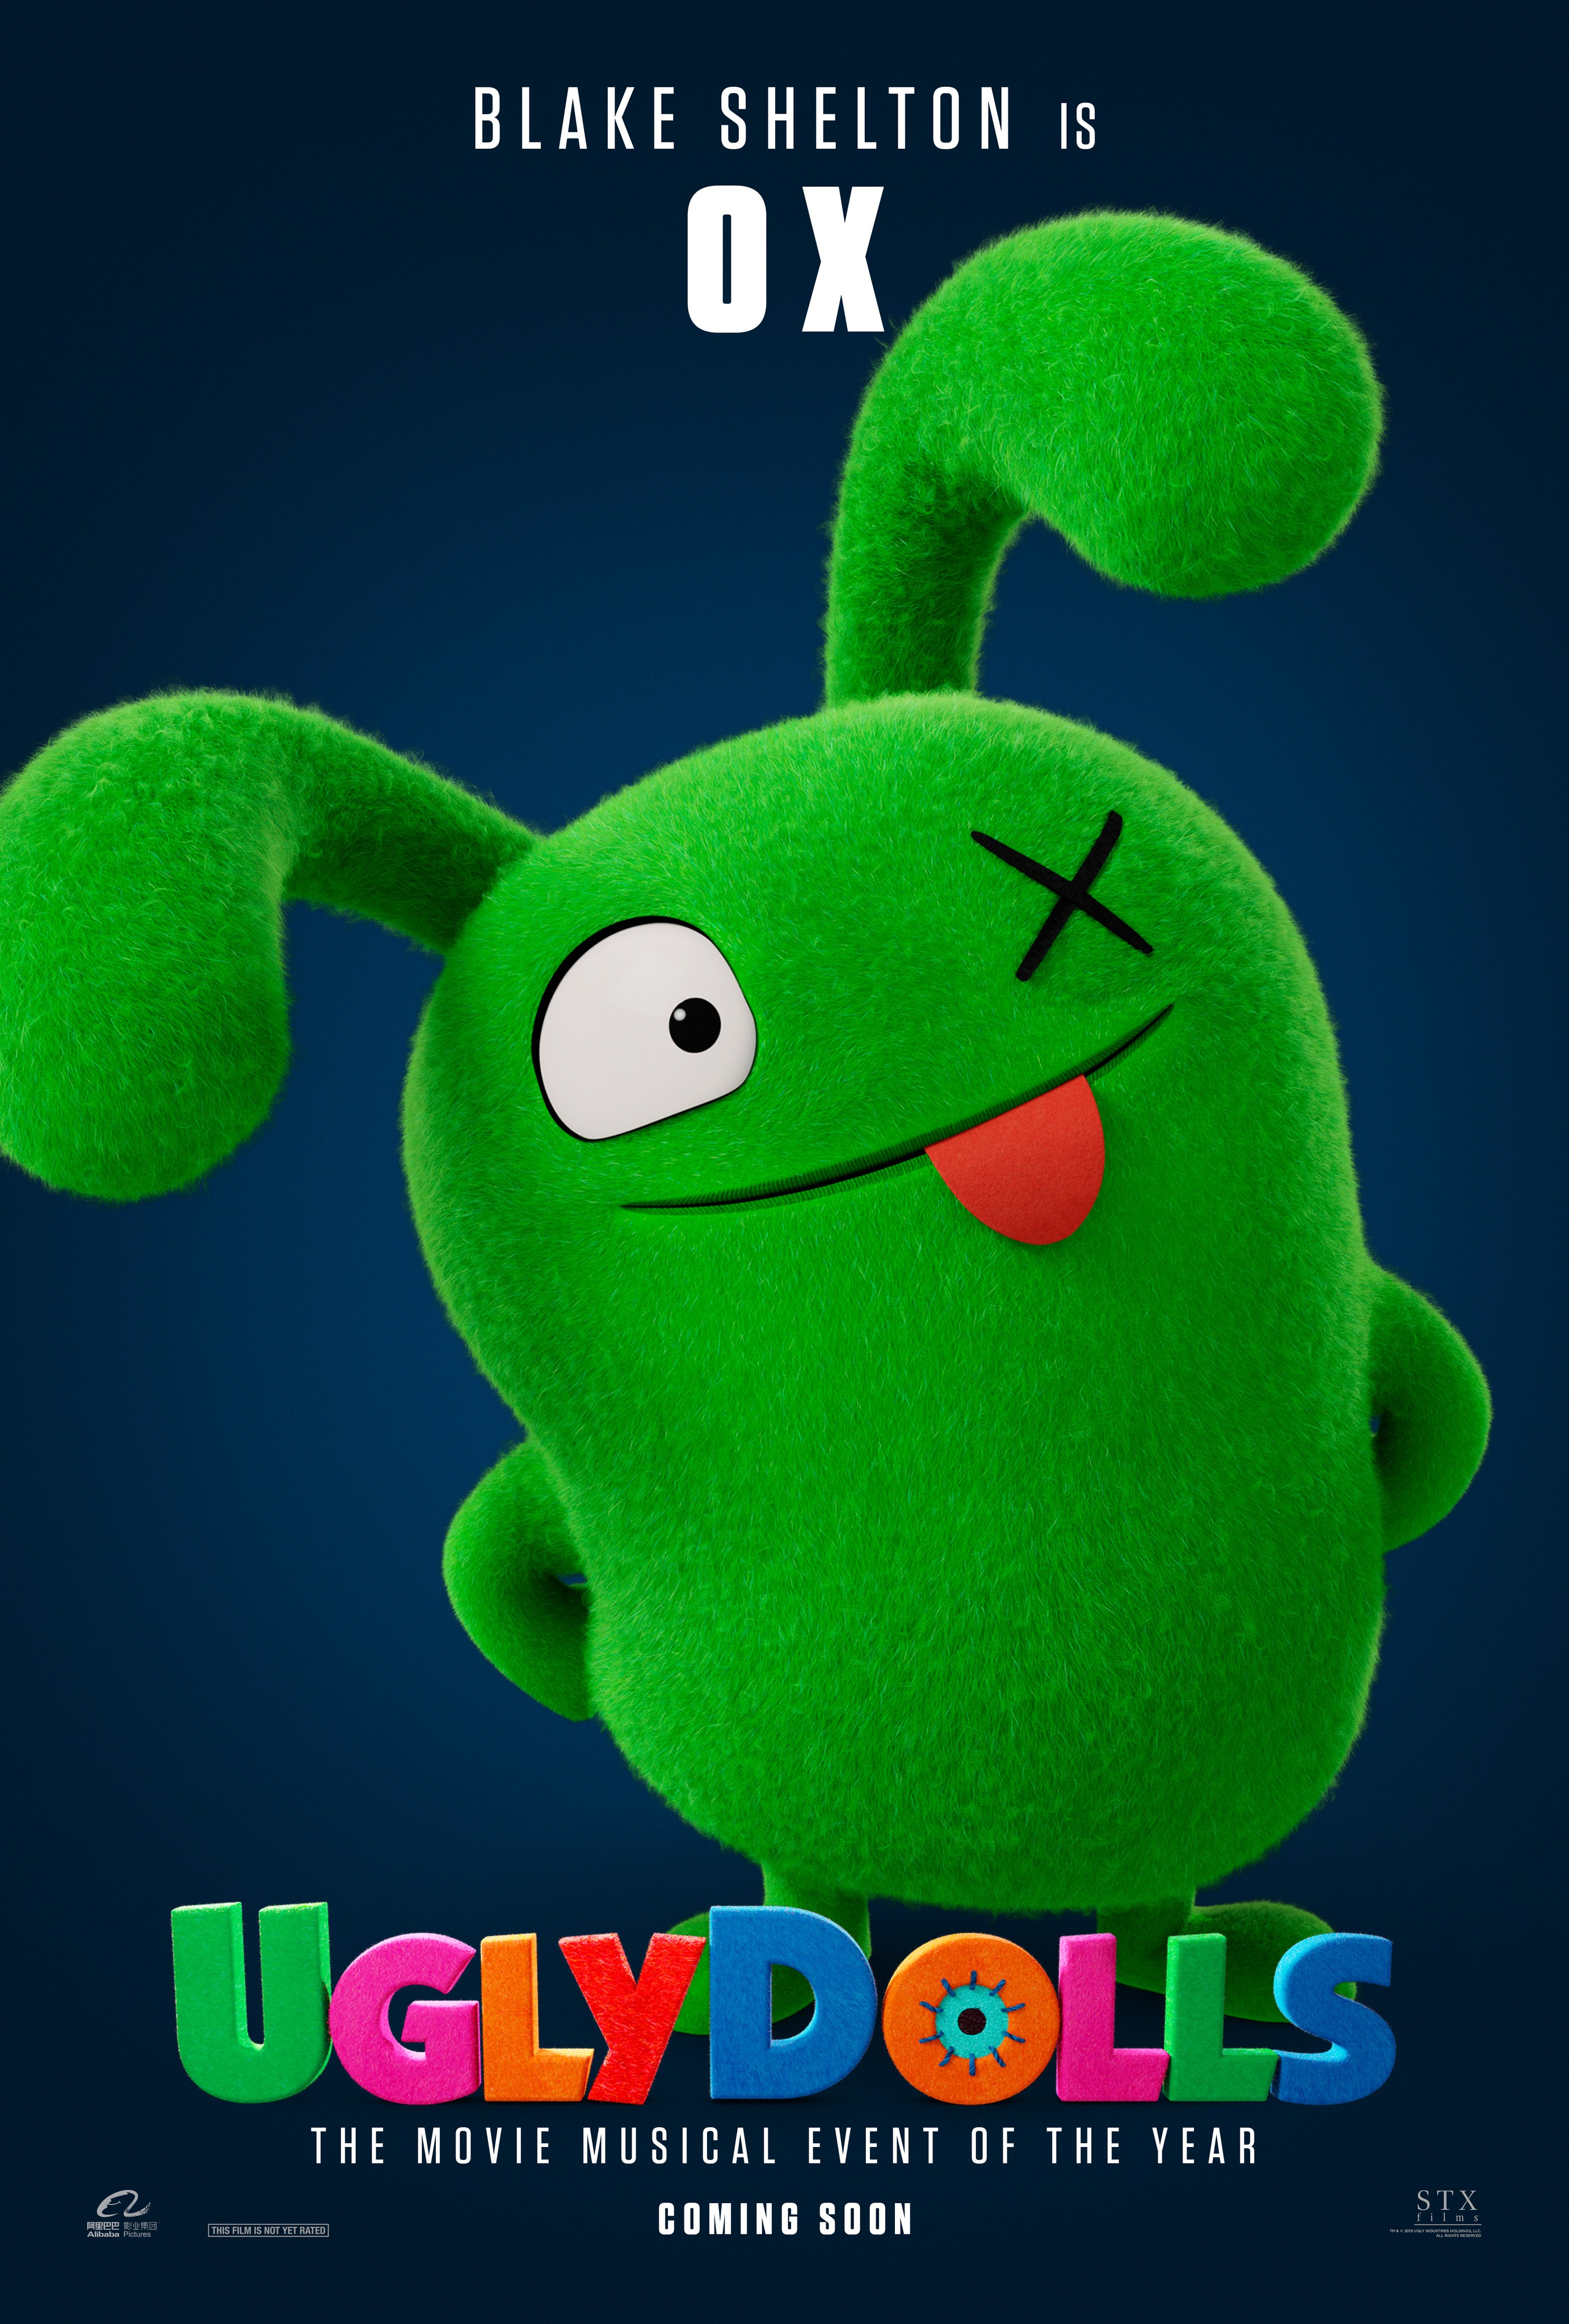 Uglydolls Character Trailer Trailers And Videos Rotten Tomatoes 5360